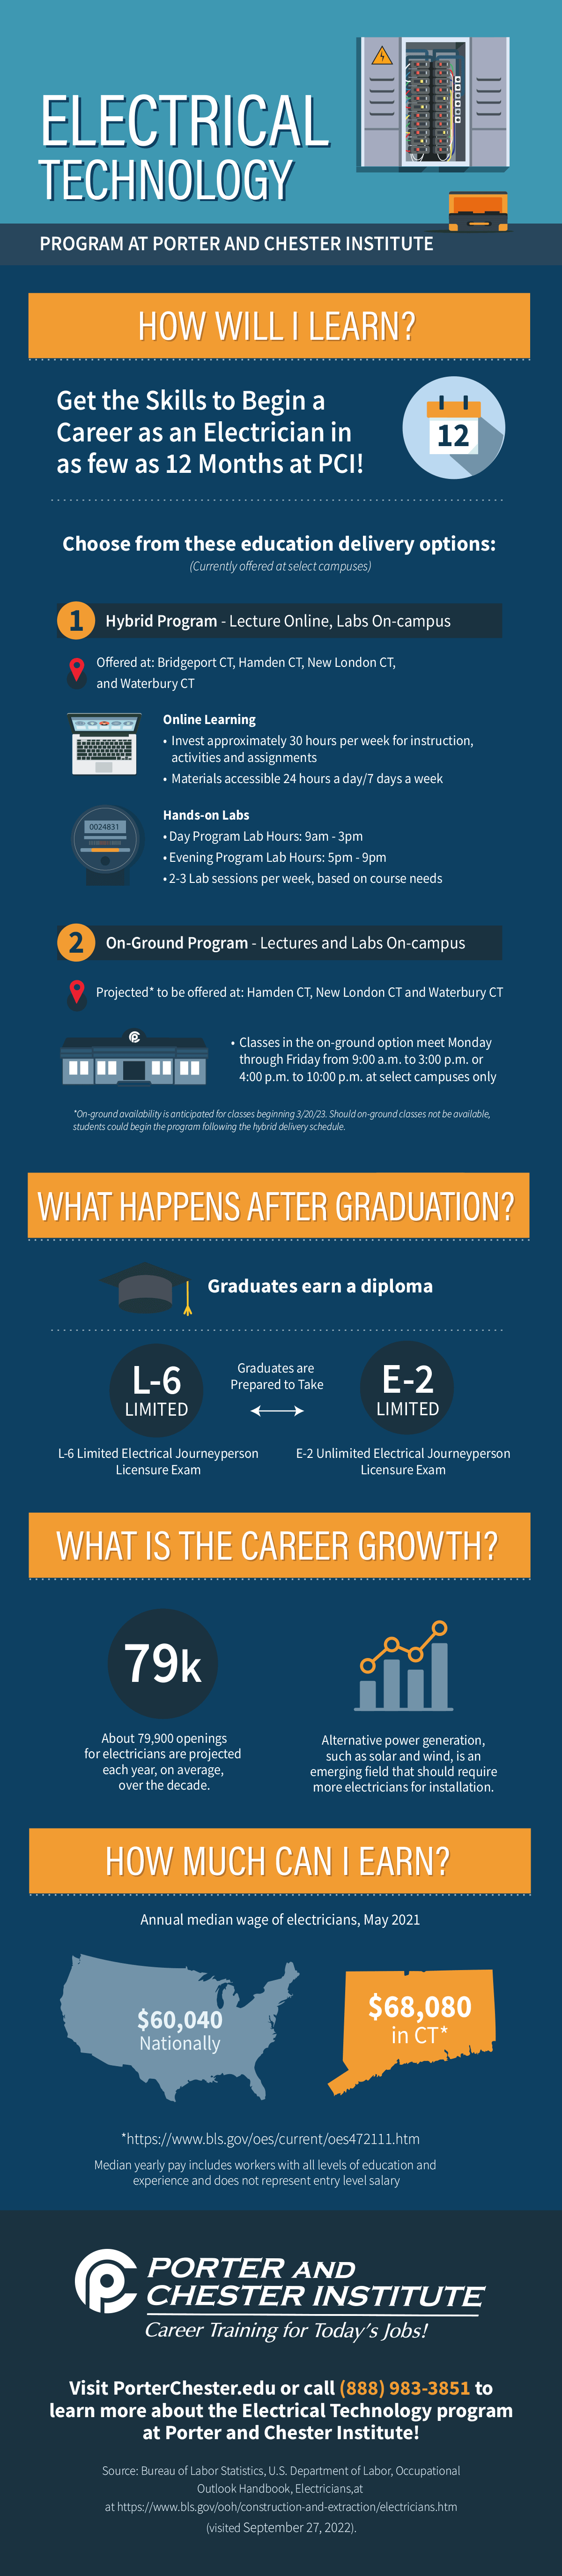 Electrical Technology Program Facts Infographic